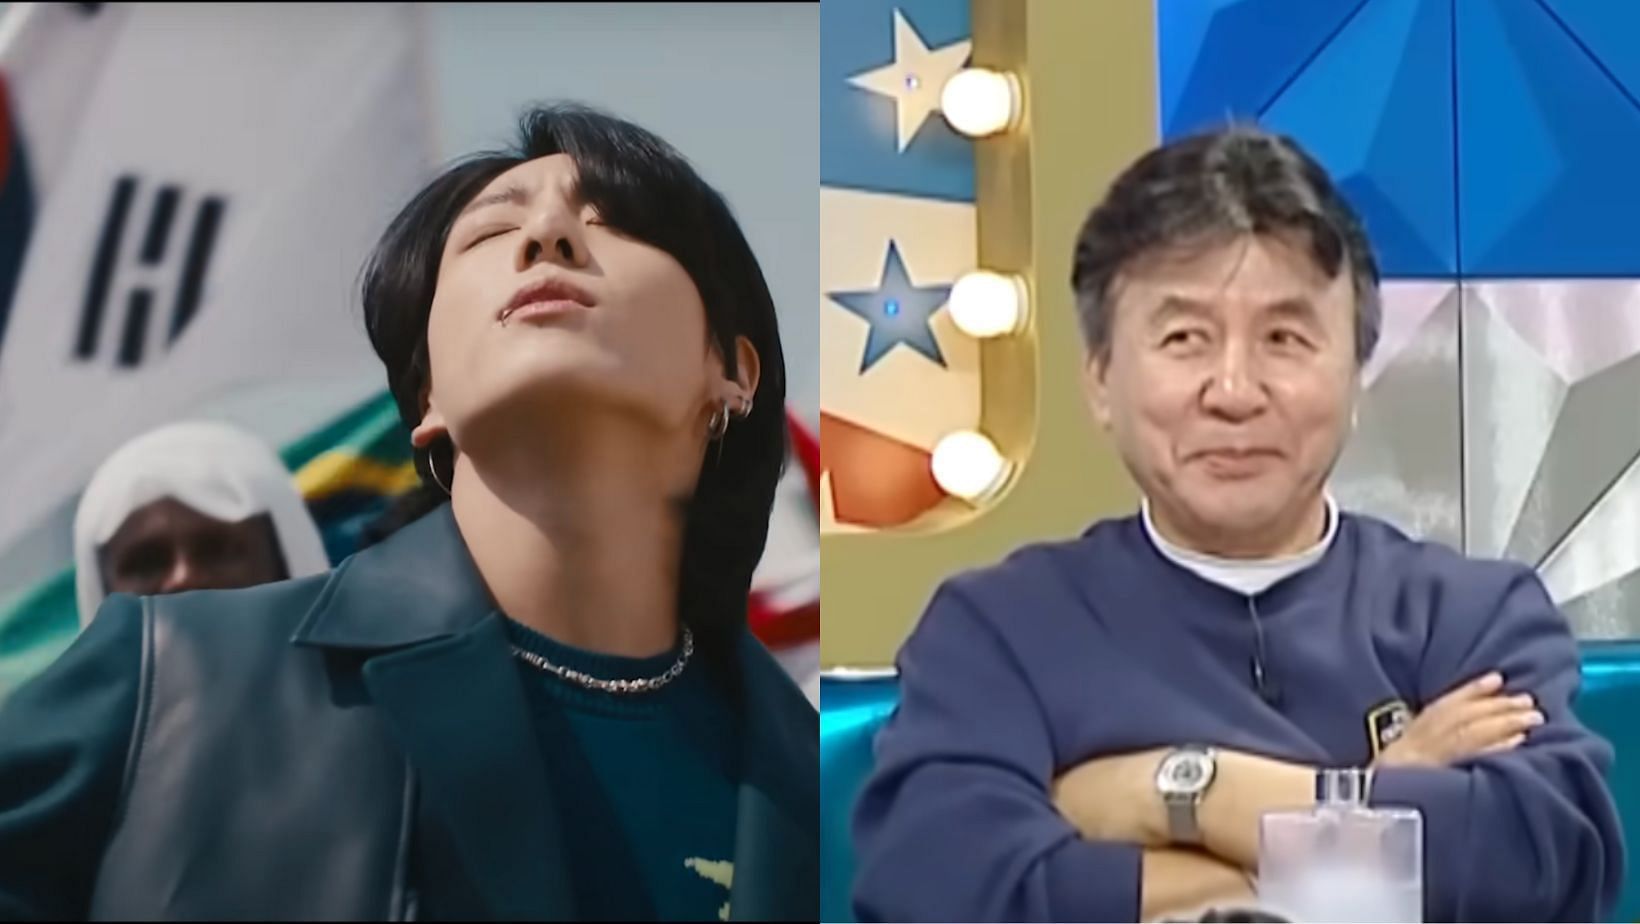 Park Yeong-gyu picks BTS&rsquo; Jungkook as his successor for the &ldquo;chameleon&rdquo; title. (Images via YouTube/FIFA and MBCentertainment)